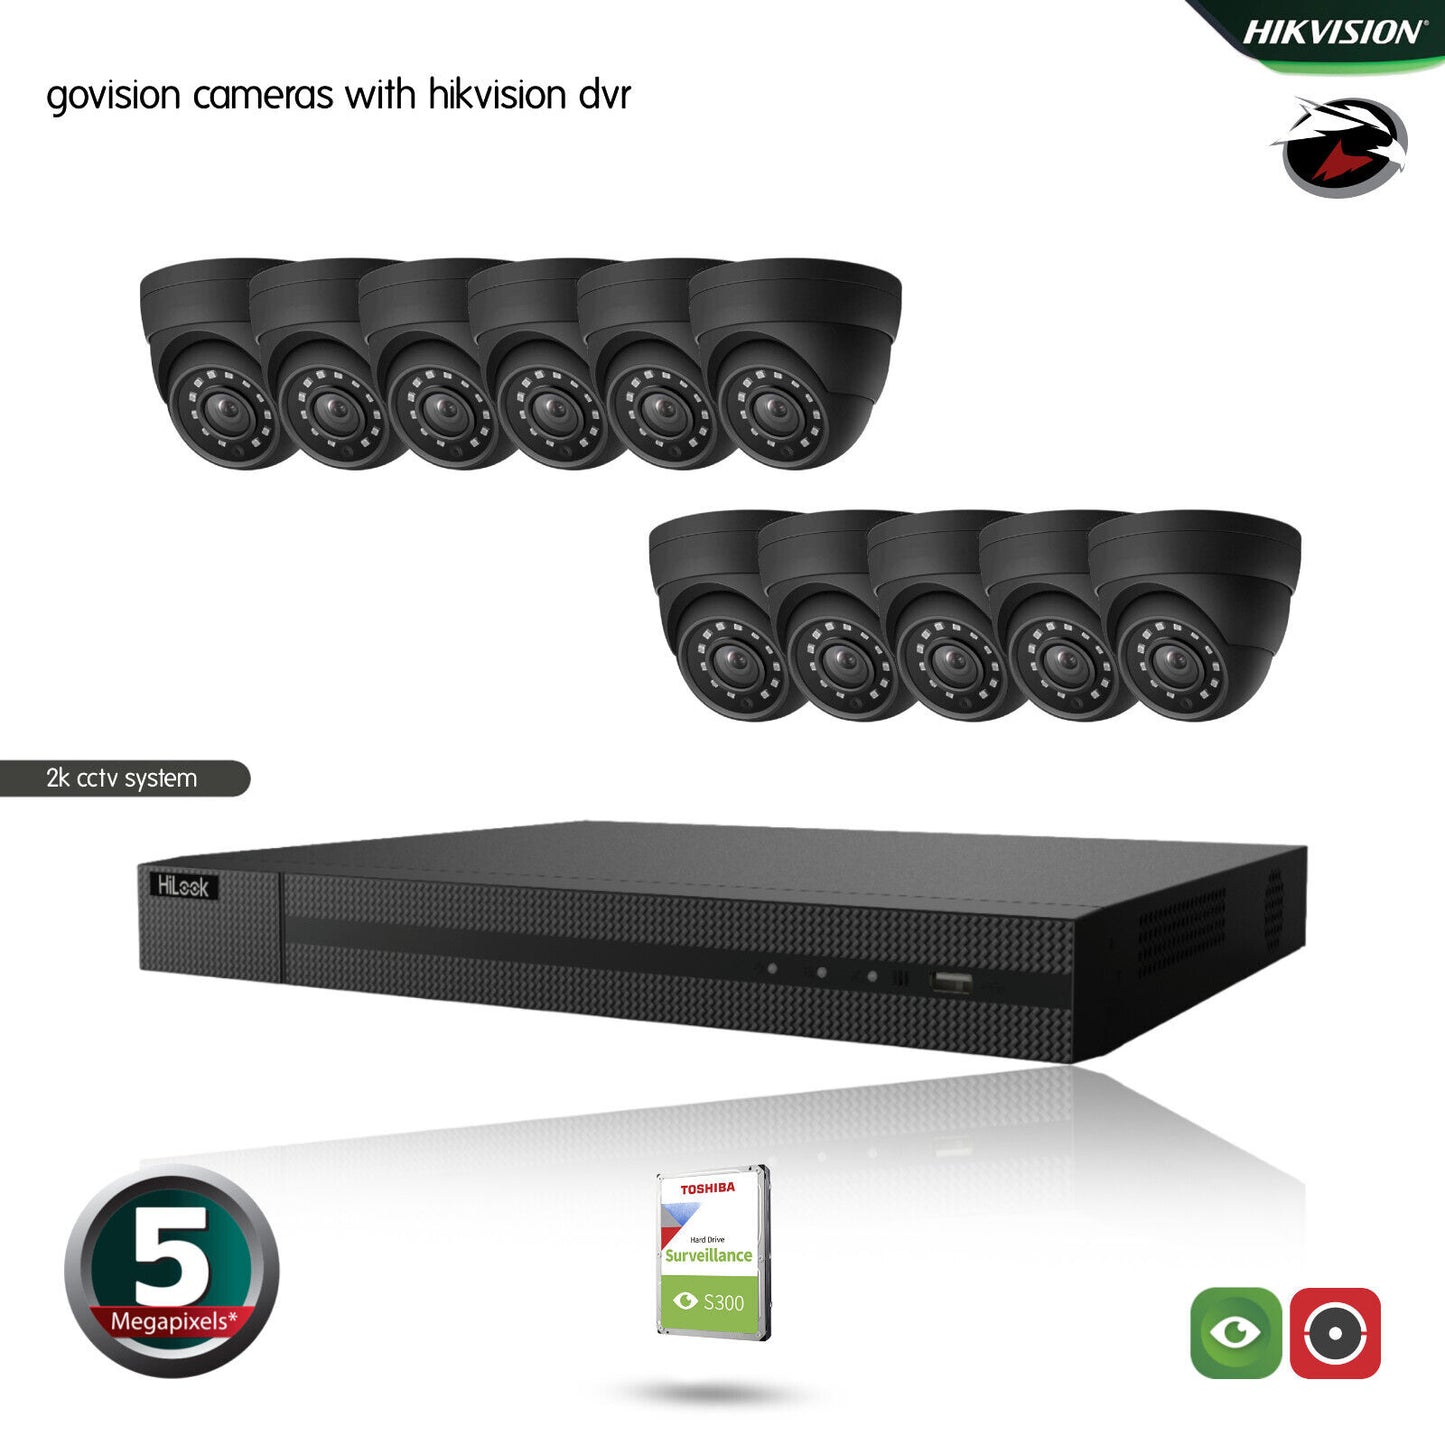 HIKVISION HILOOK CCTV SYSTEM 5MP DVR OUTDOOR NIGHTVISION SECURITY HD CAMERA KIT 16CH DVR 11xCameras 2TB HDD